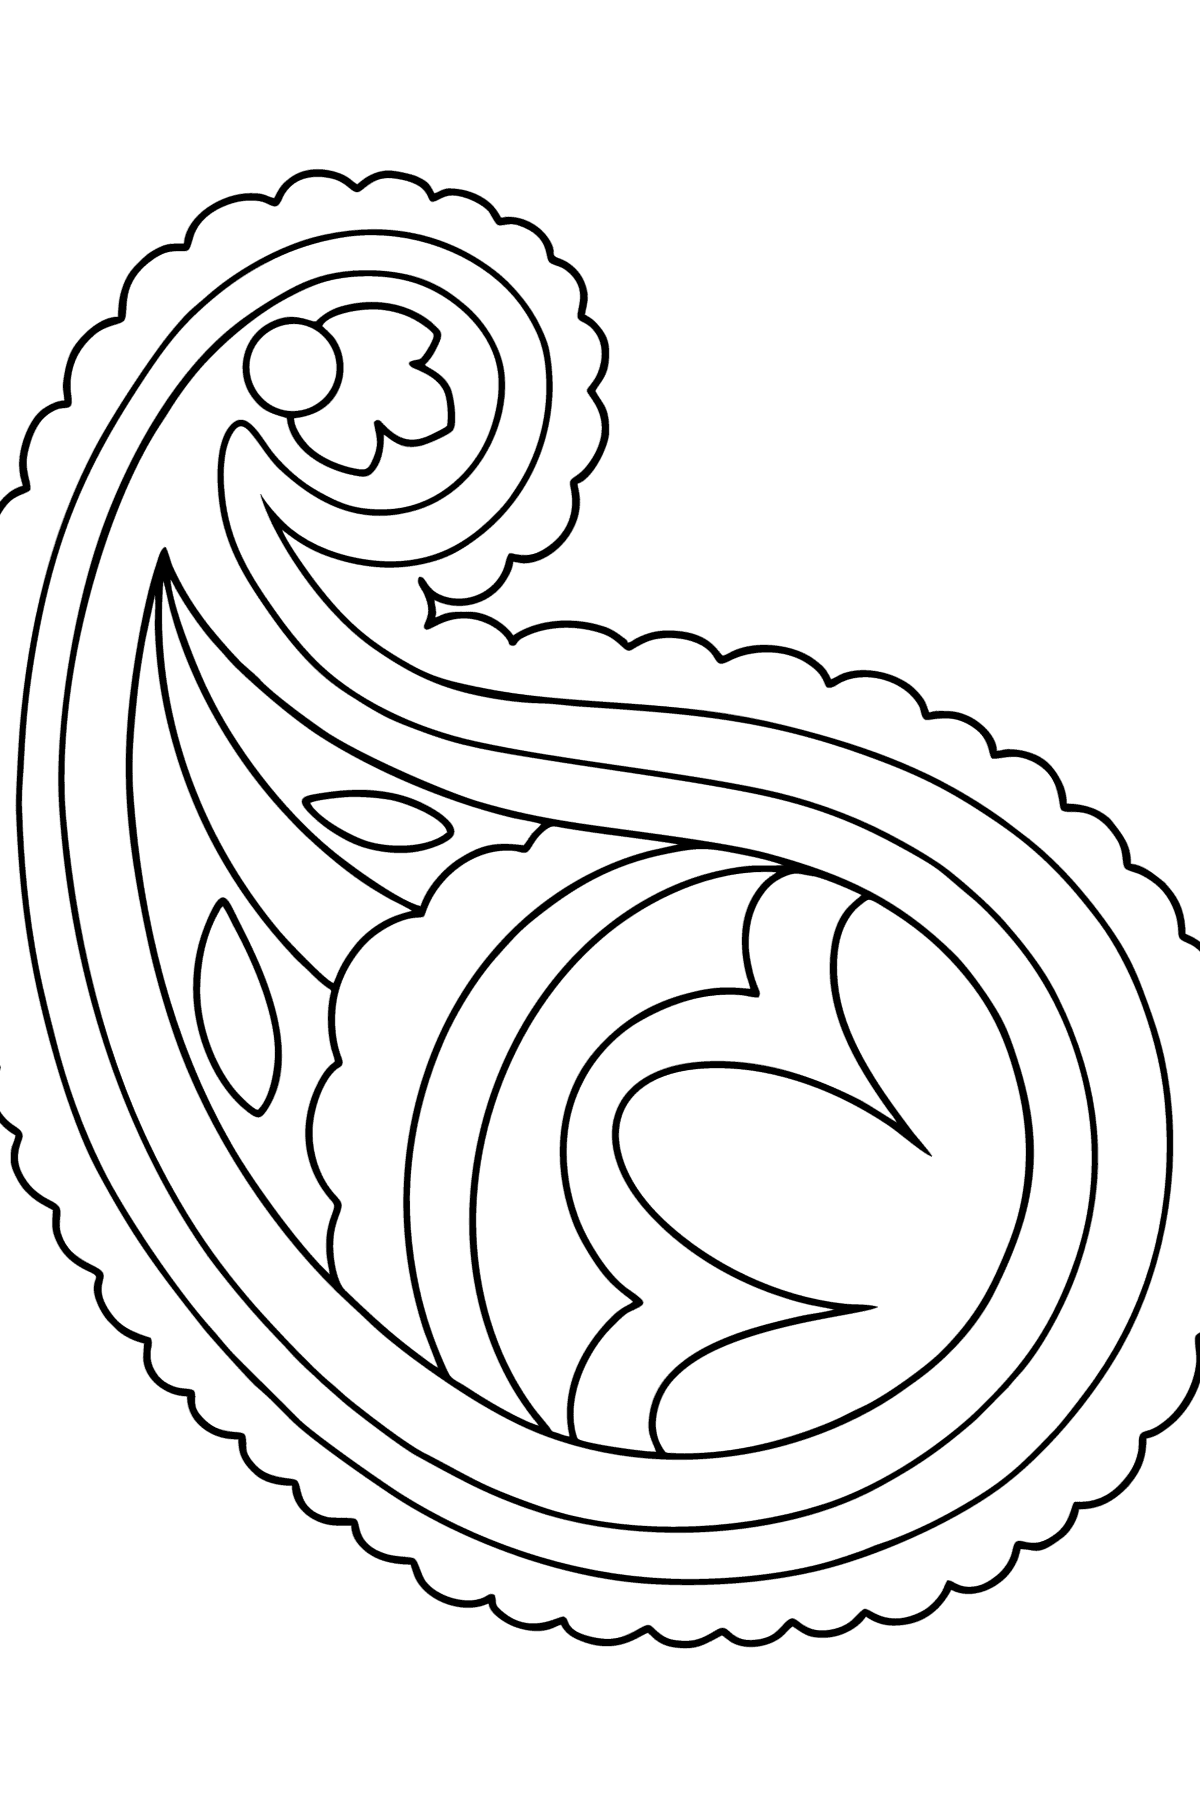 Paisley coloring page - 16 Elements - Coloring Pages for Kids